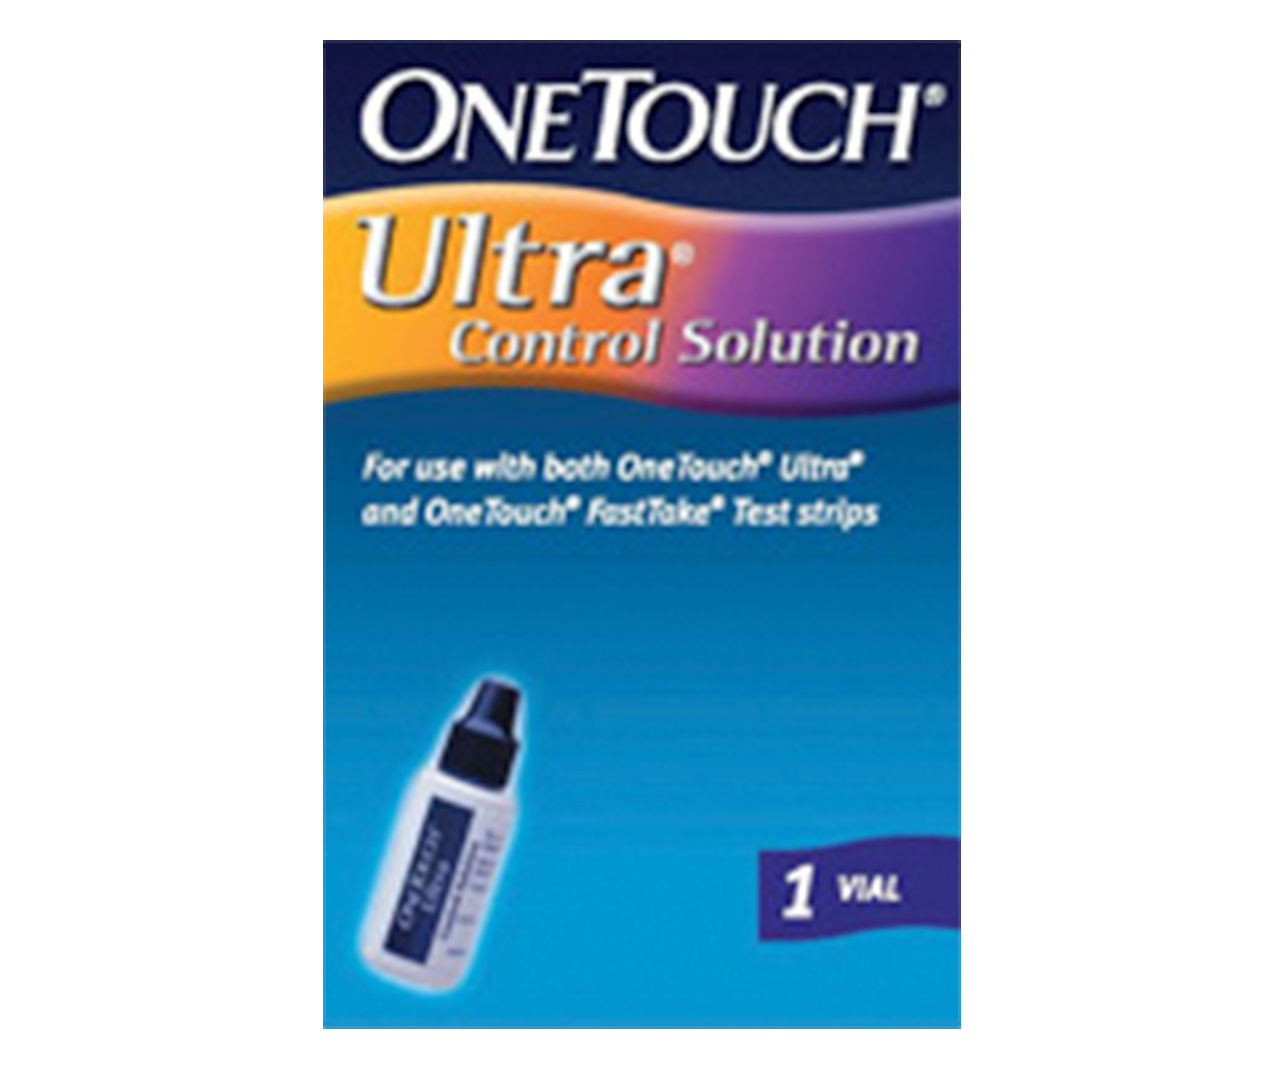 OneTouch® Ultra Control Solution